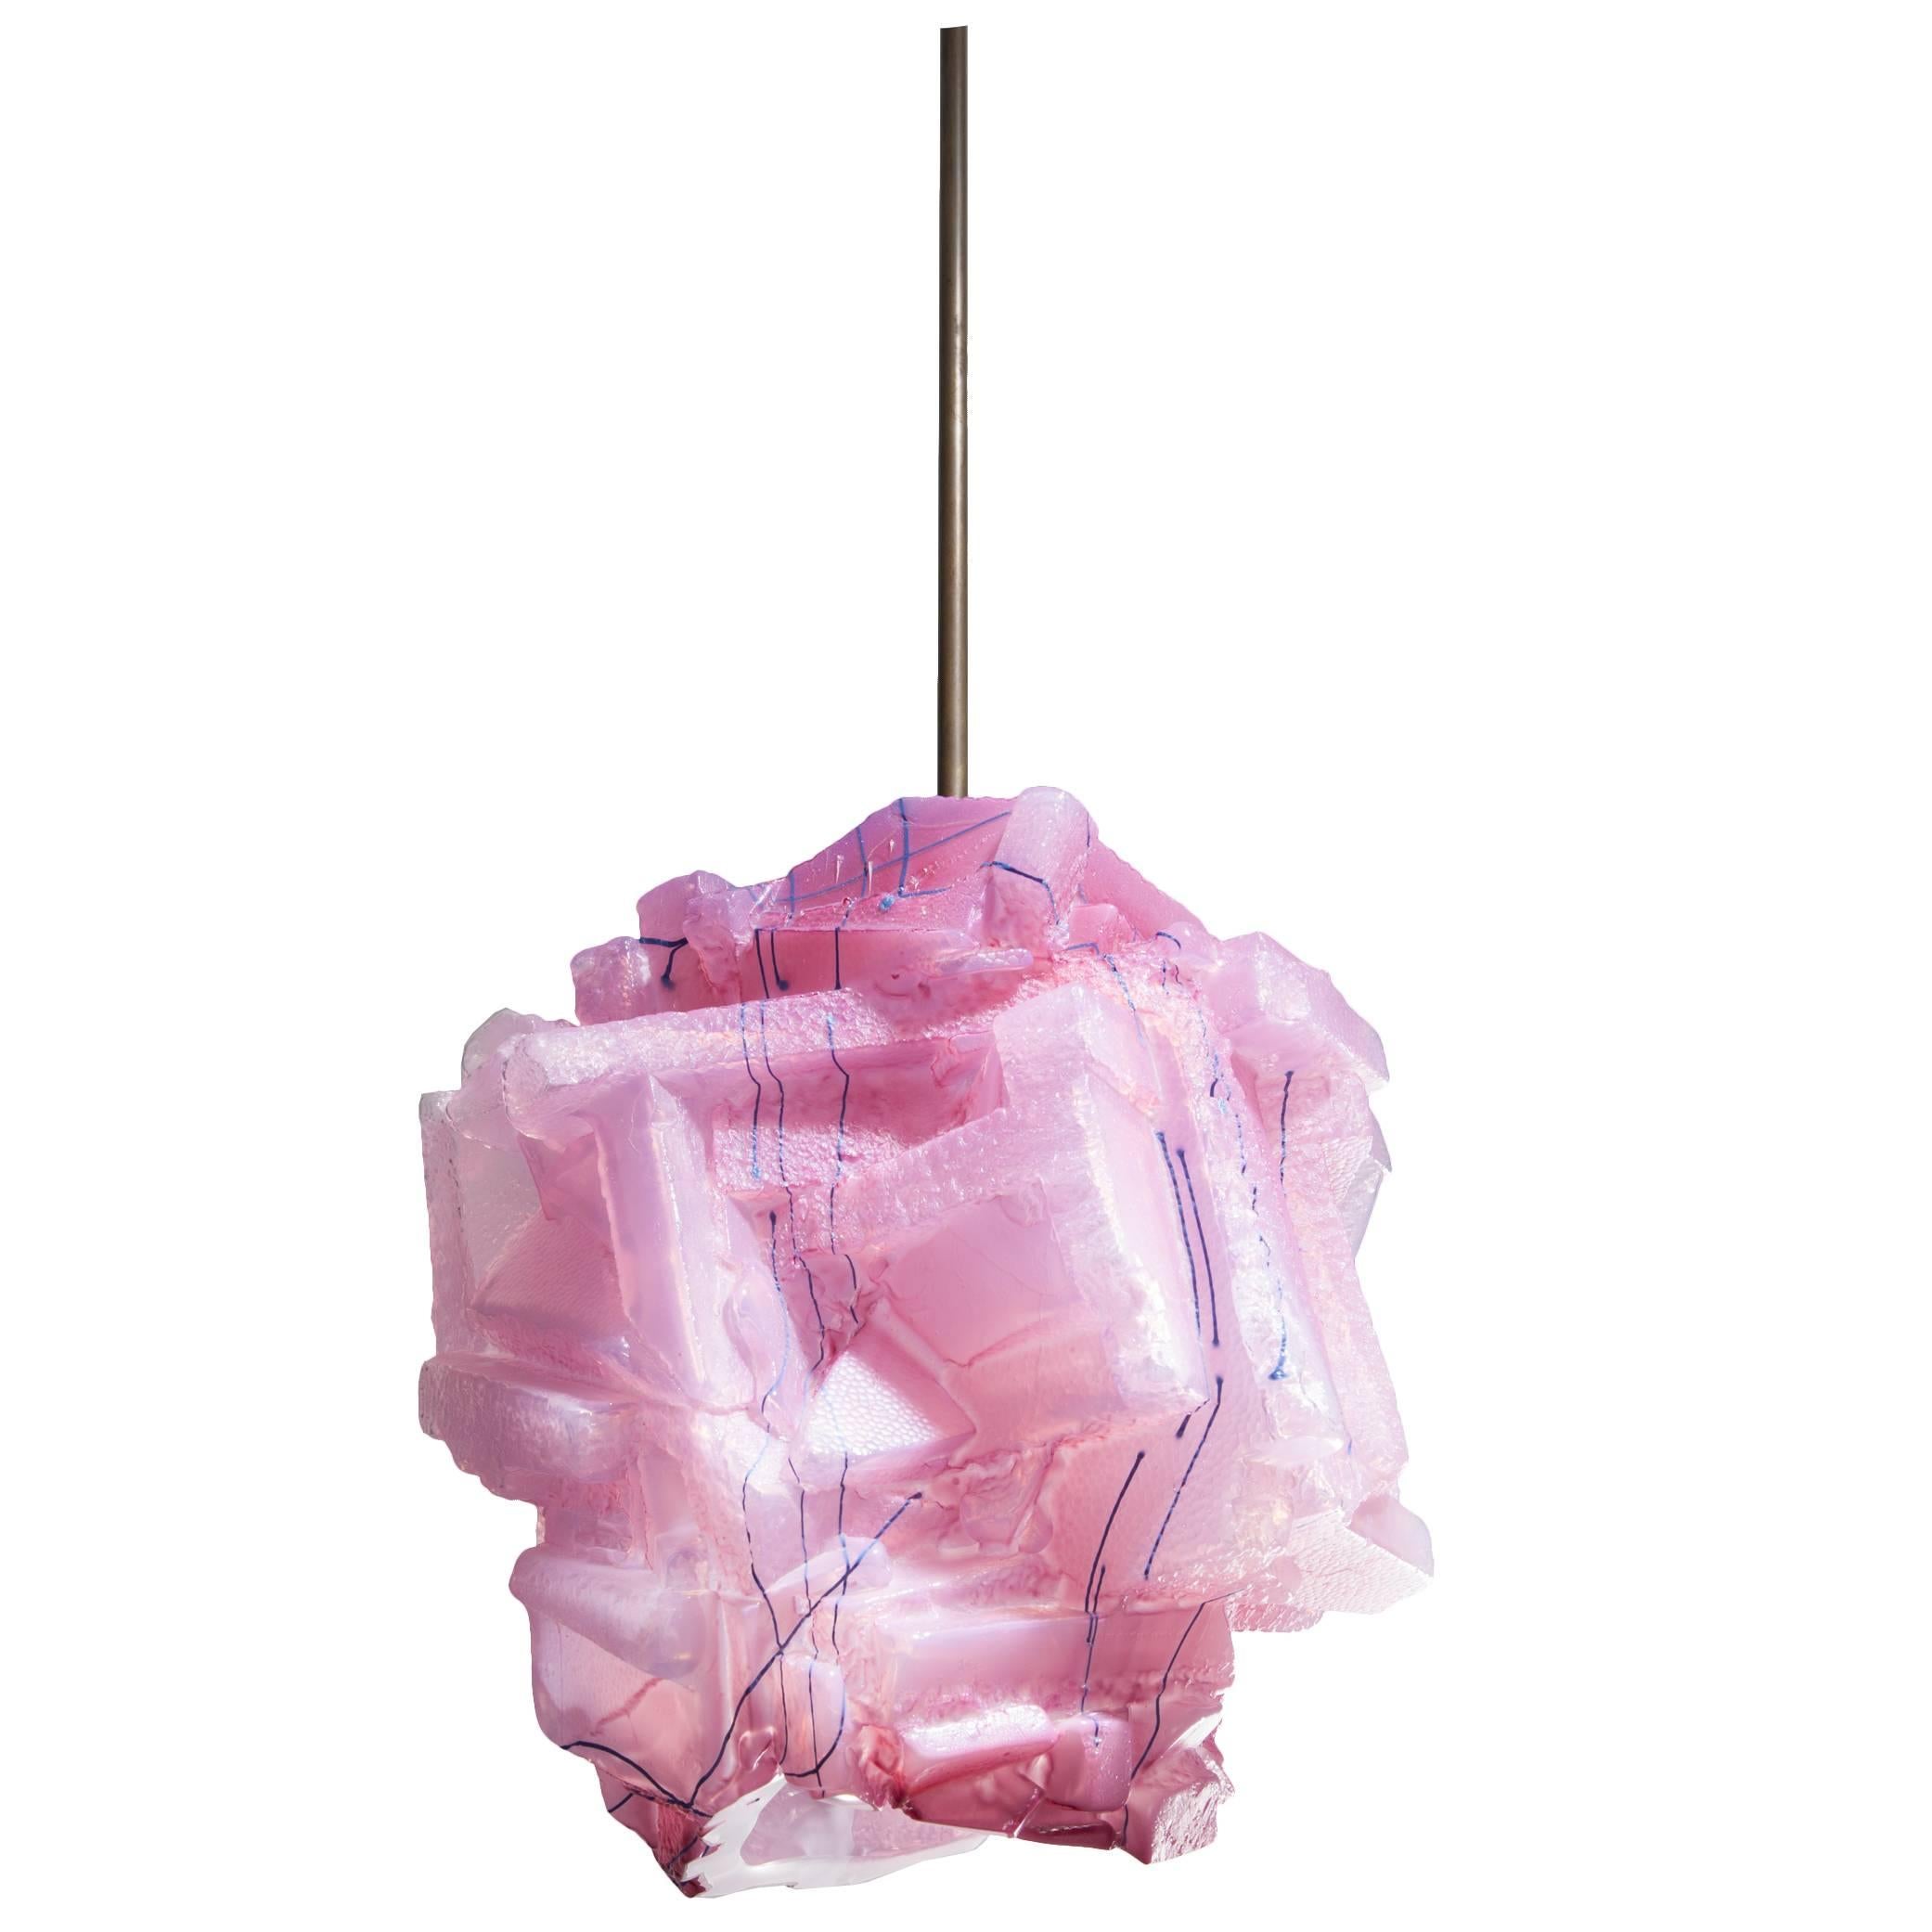 Unique Assemblage Pendant Lamp in Handblown Glass by Thaddeus Wolfe, 2015